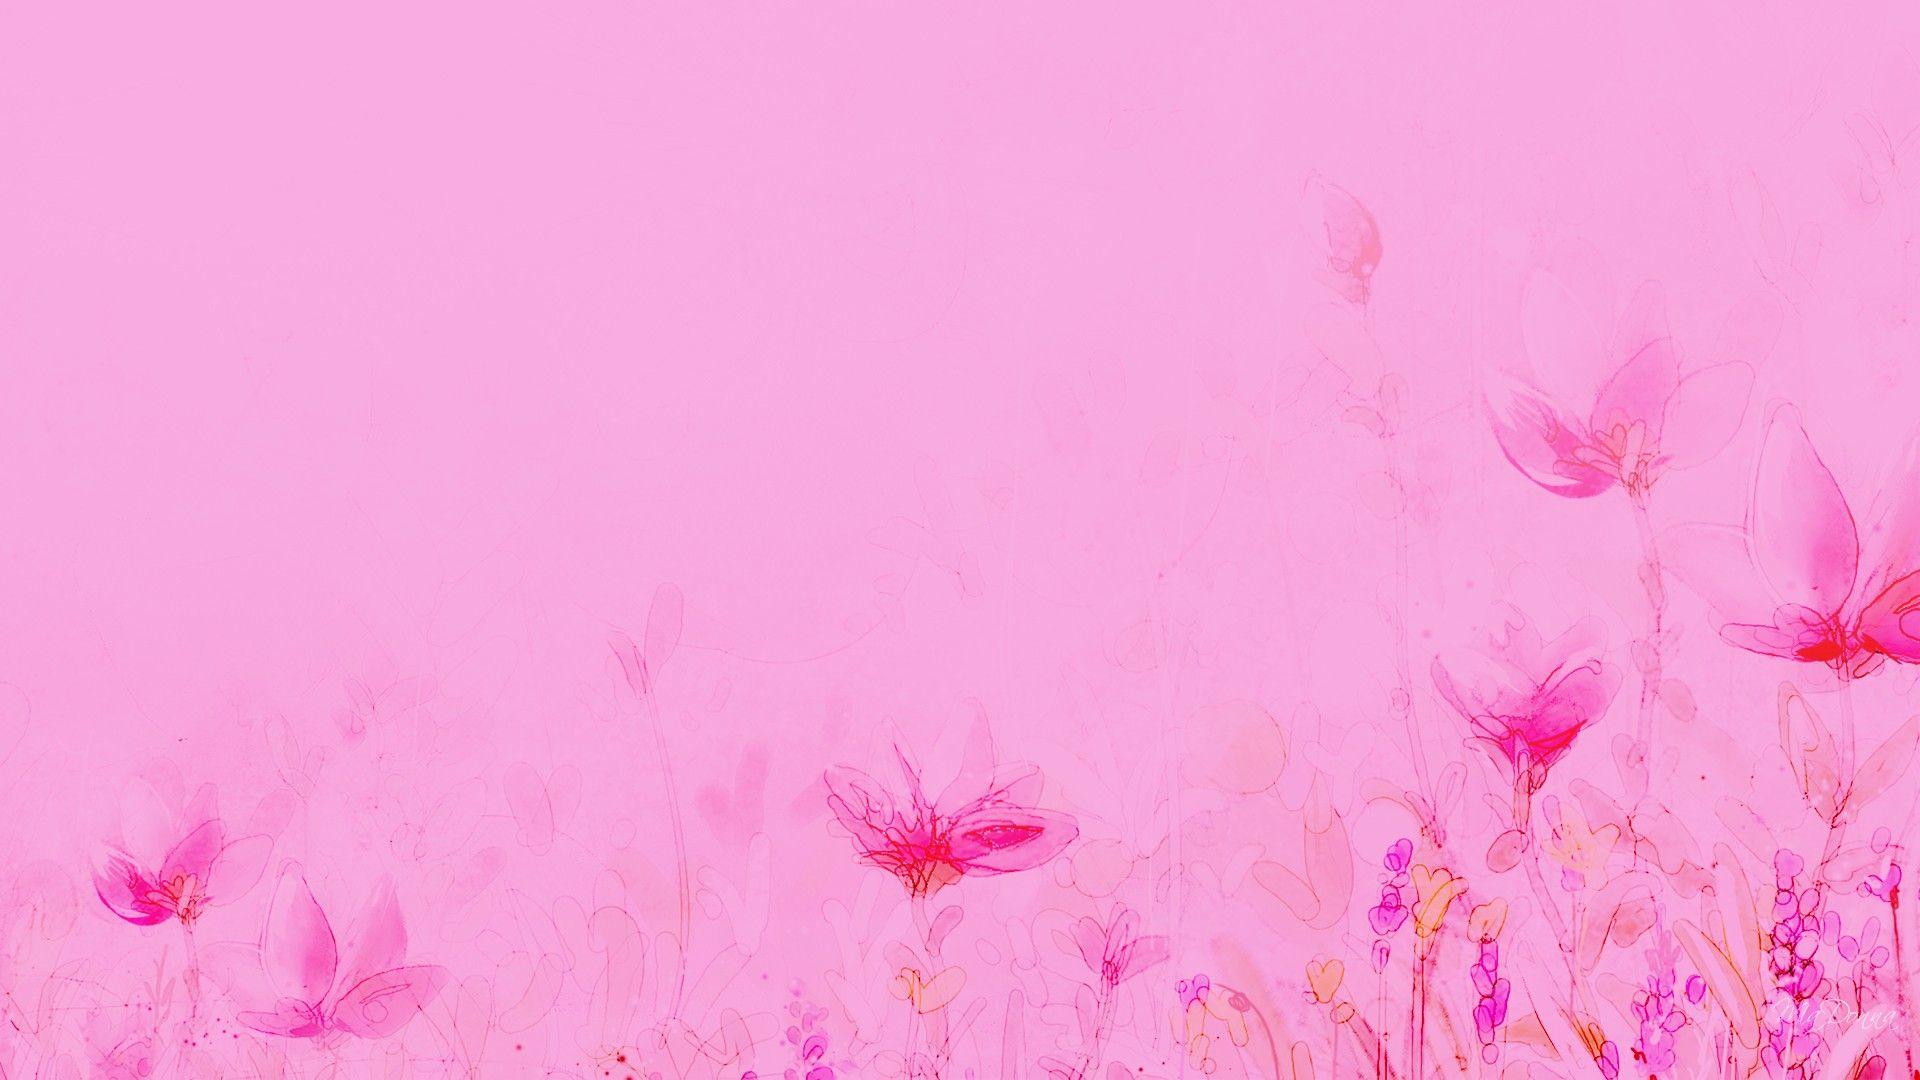 HD Backgrounds Pink - Wallpaper Cave